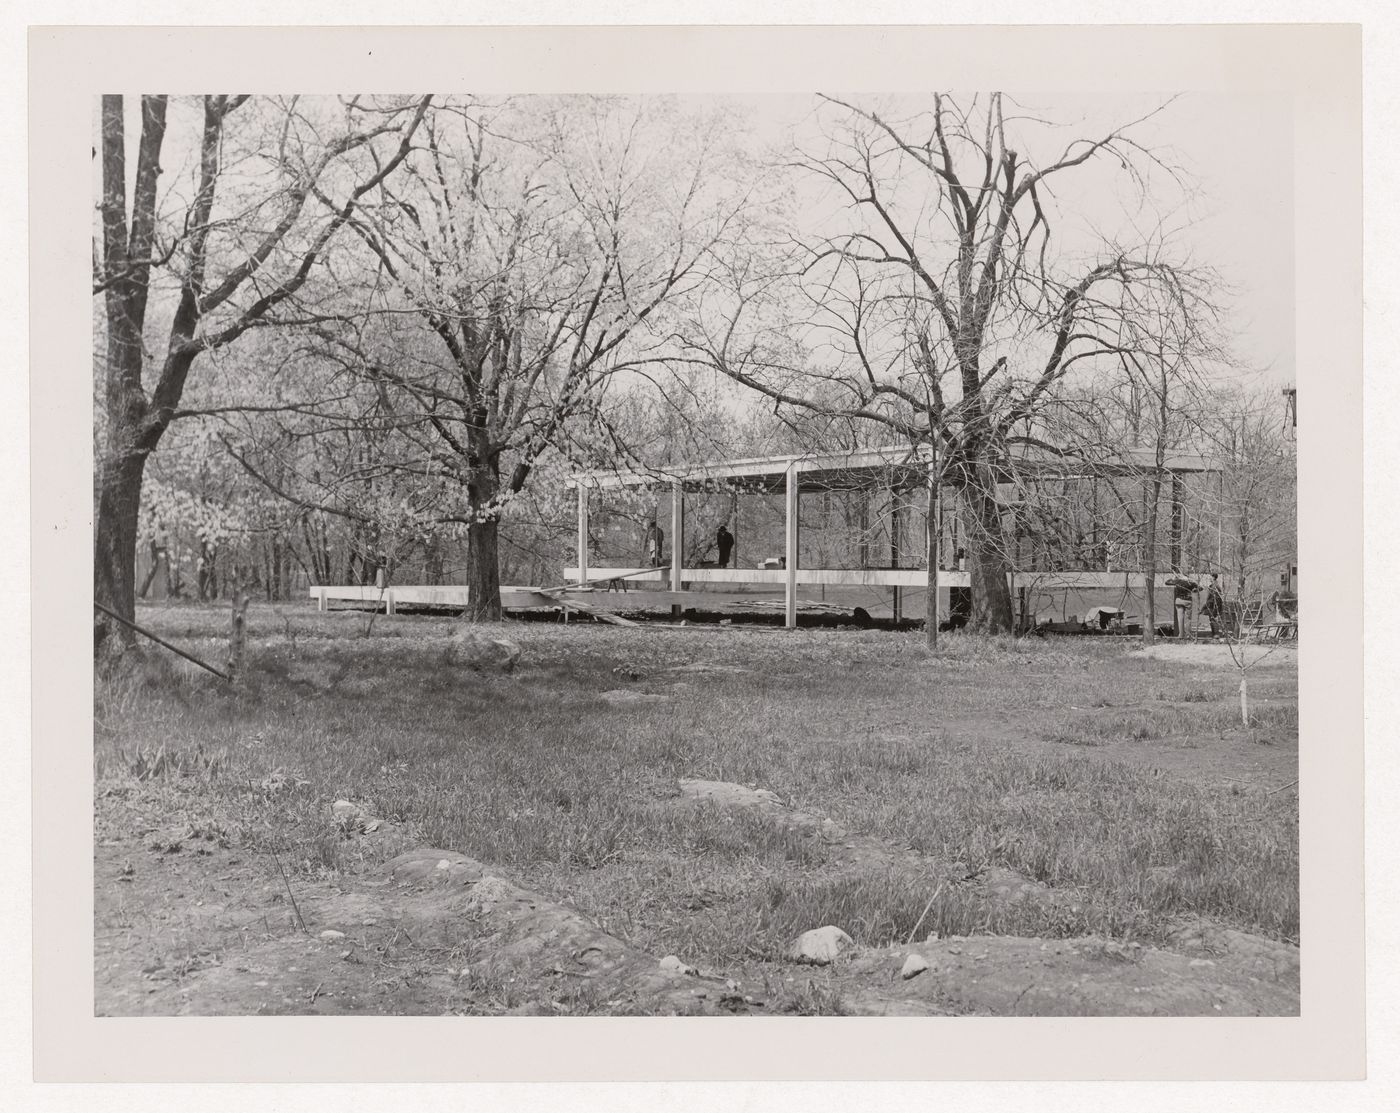 View of Farnsworth House under construction